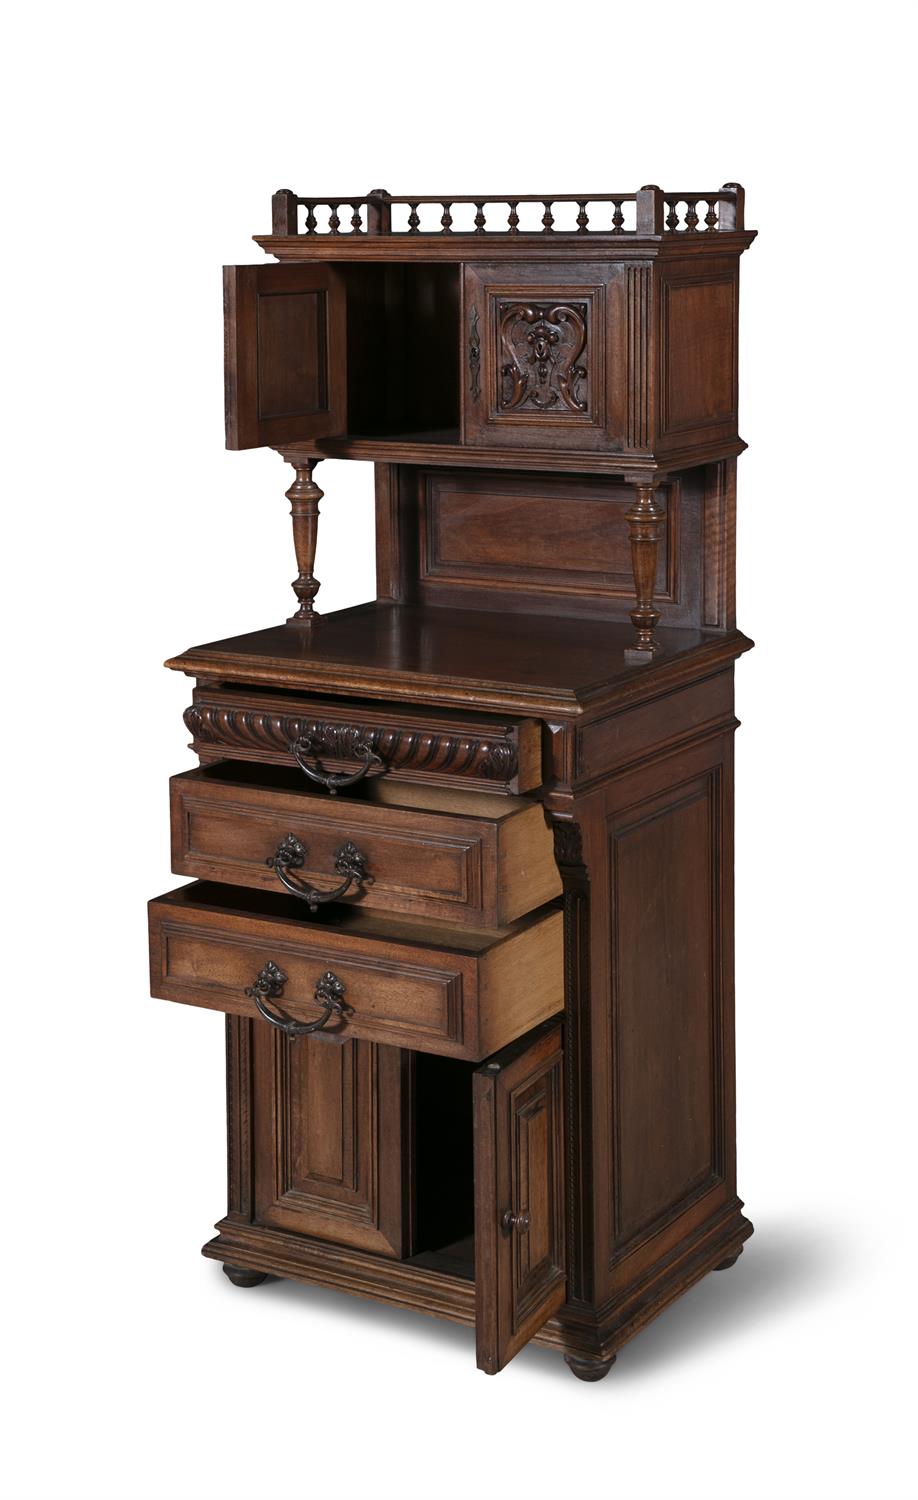 A PAIR OF 19TH CENTURY FRENCH CARVED WALNUT SIDE CABINETS BY C.H. JEANSELME & CO. (PARIS), C. - Image 3 of 5